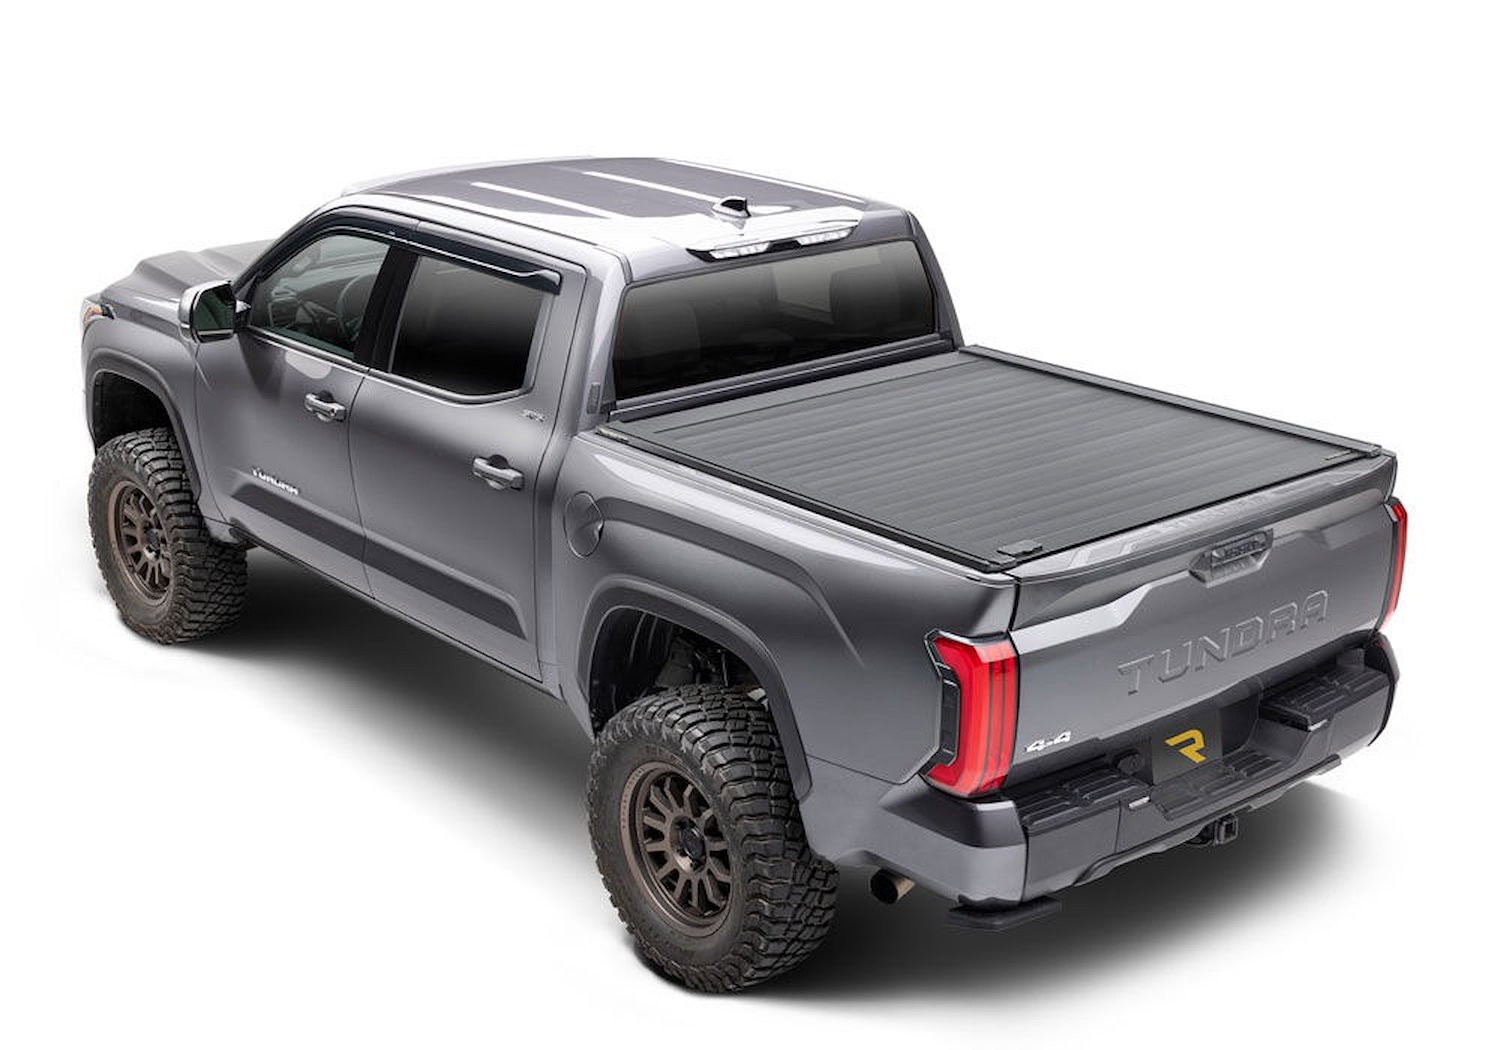 T-80863 RetraxPRO XR Retractable Tonneau Cover Fits Select Toyota Tundra Regular/Double Cab 6' 7" Bed with Deck Rail System